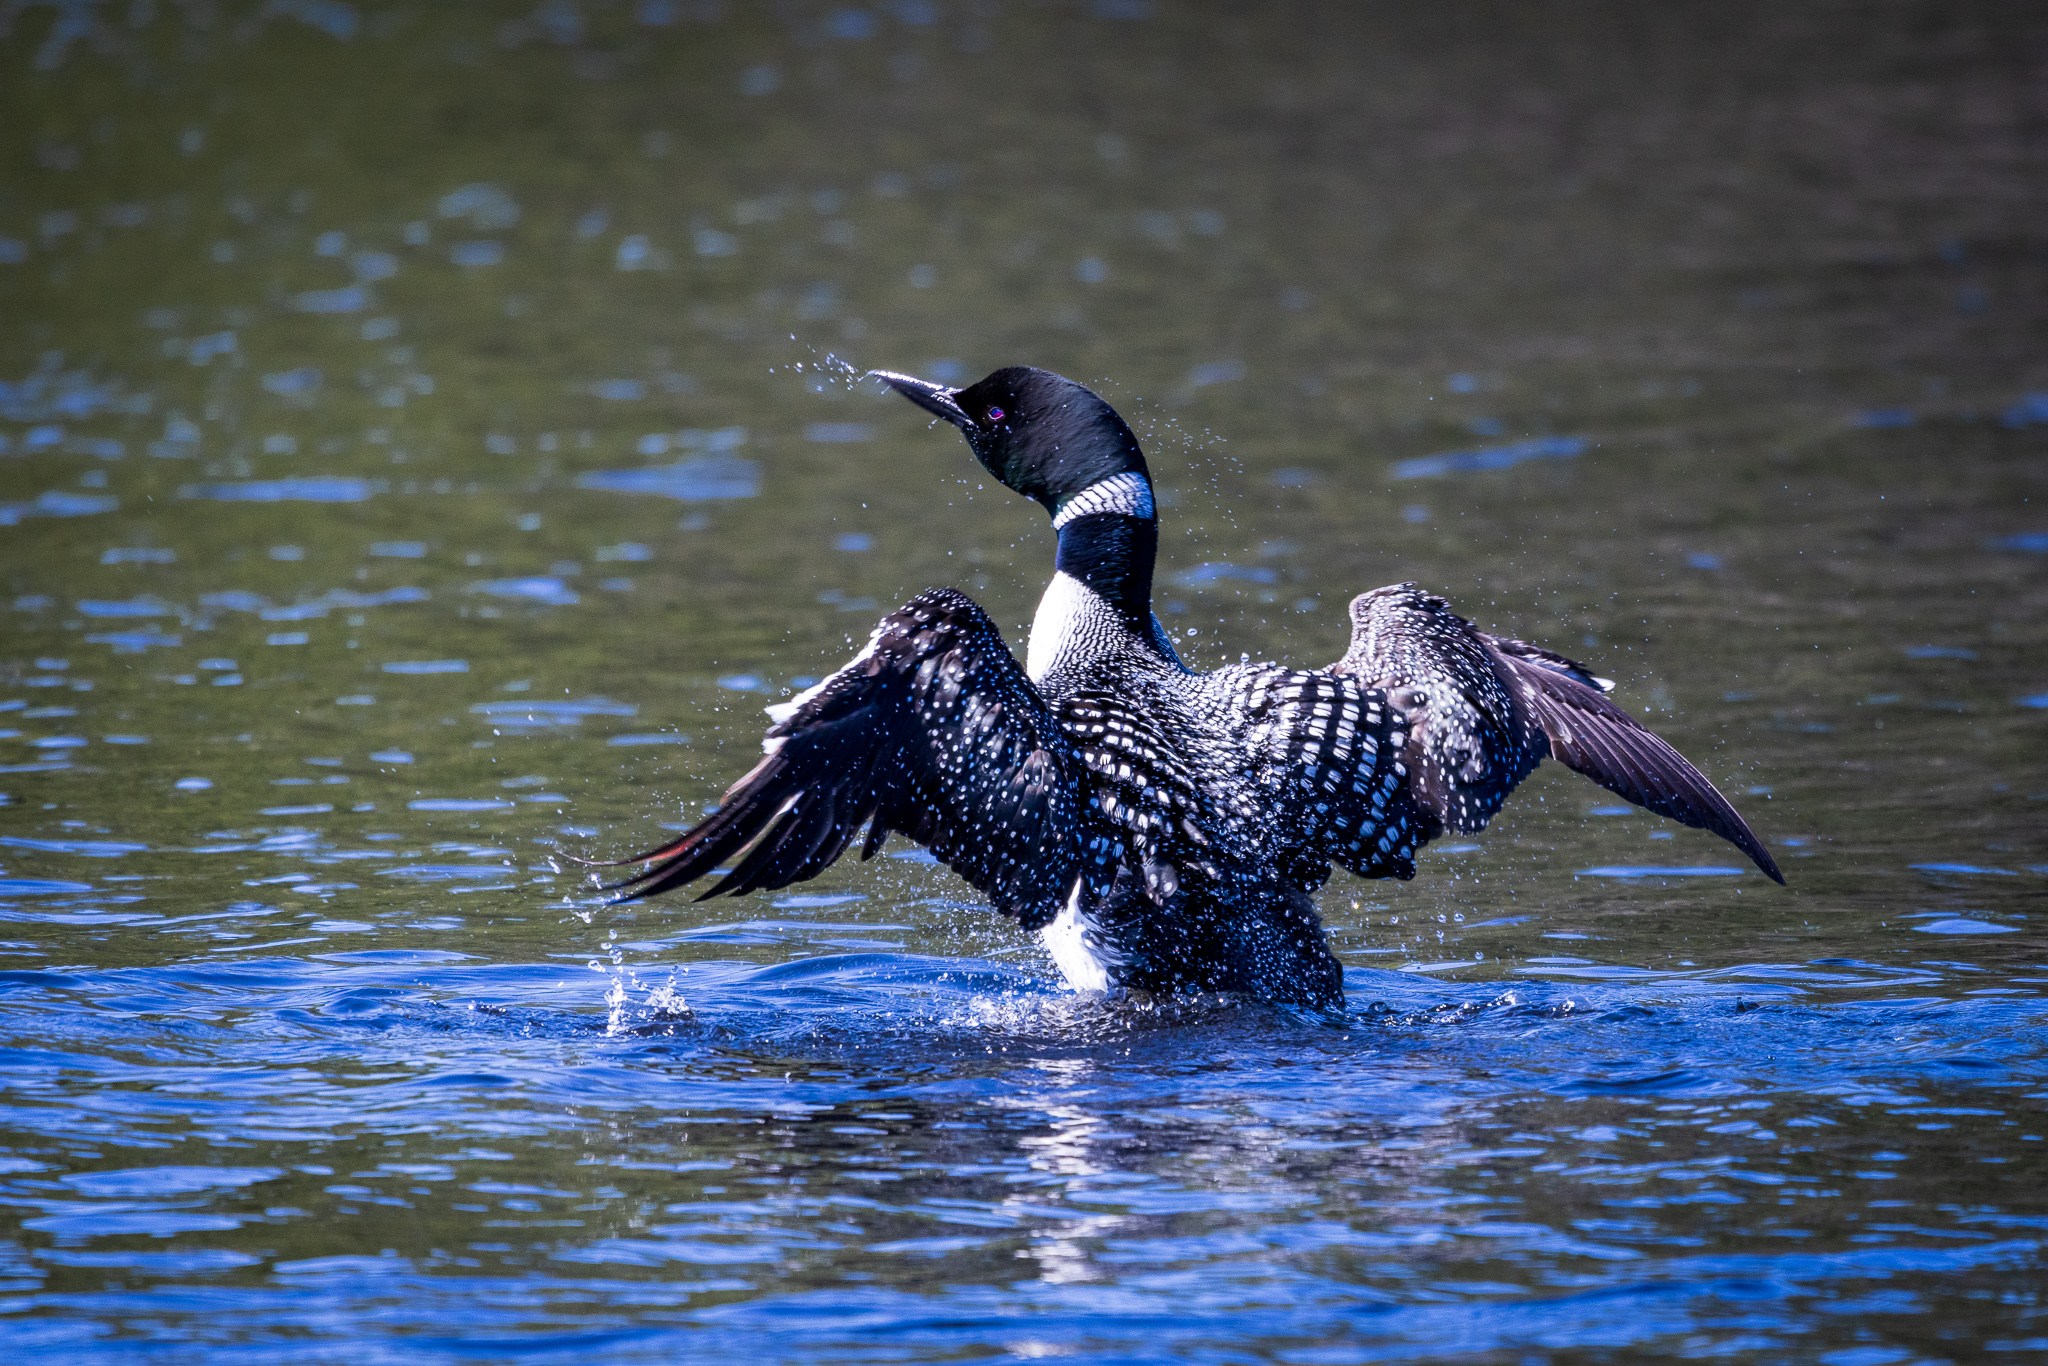 Male Loon Shaking Water from Feathers at Voyageurs National Park